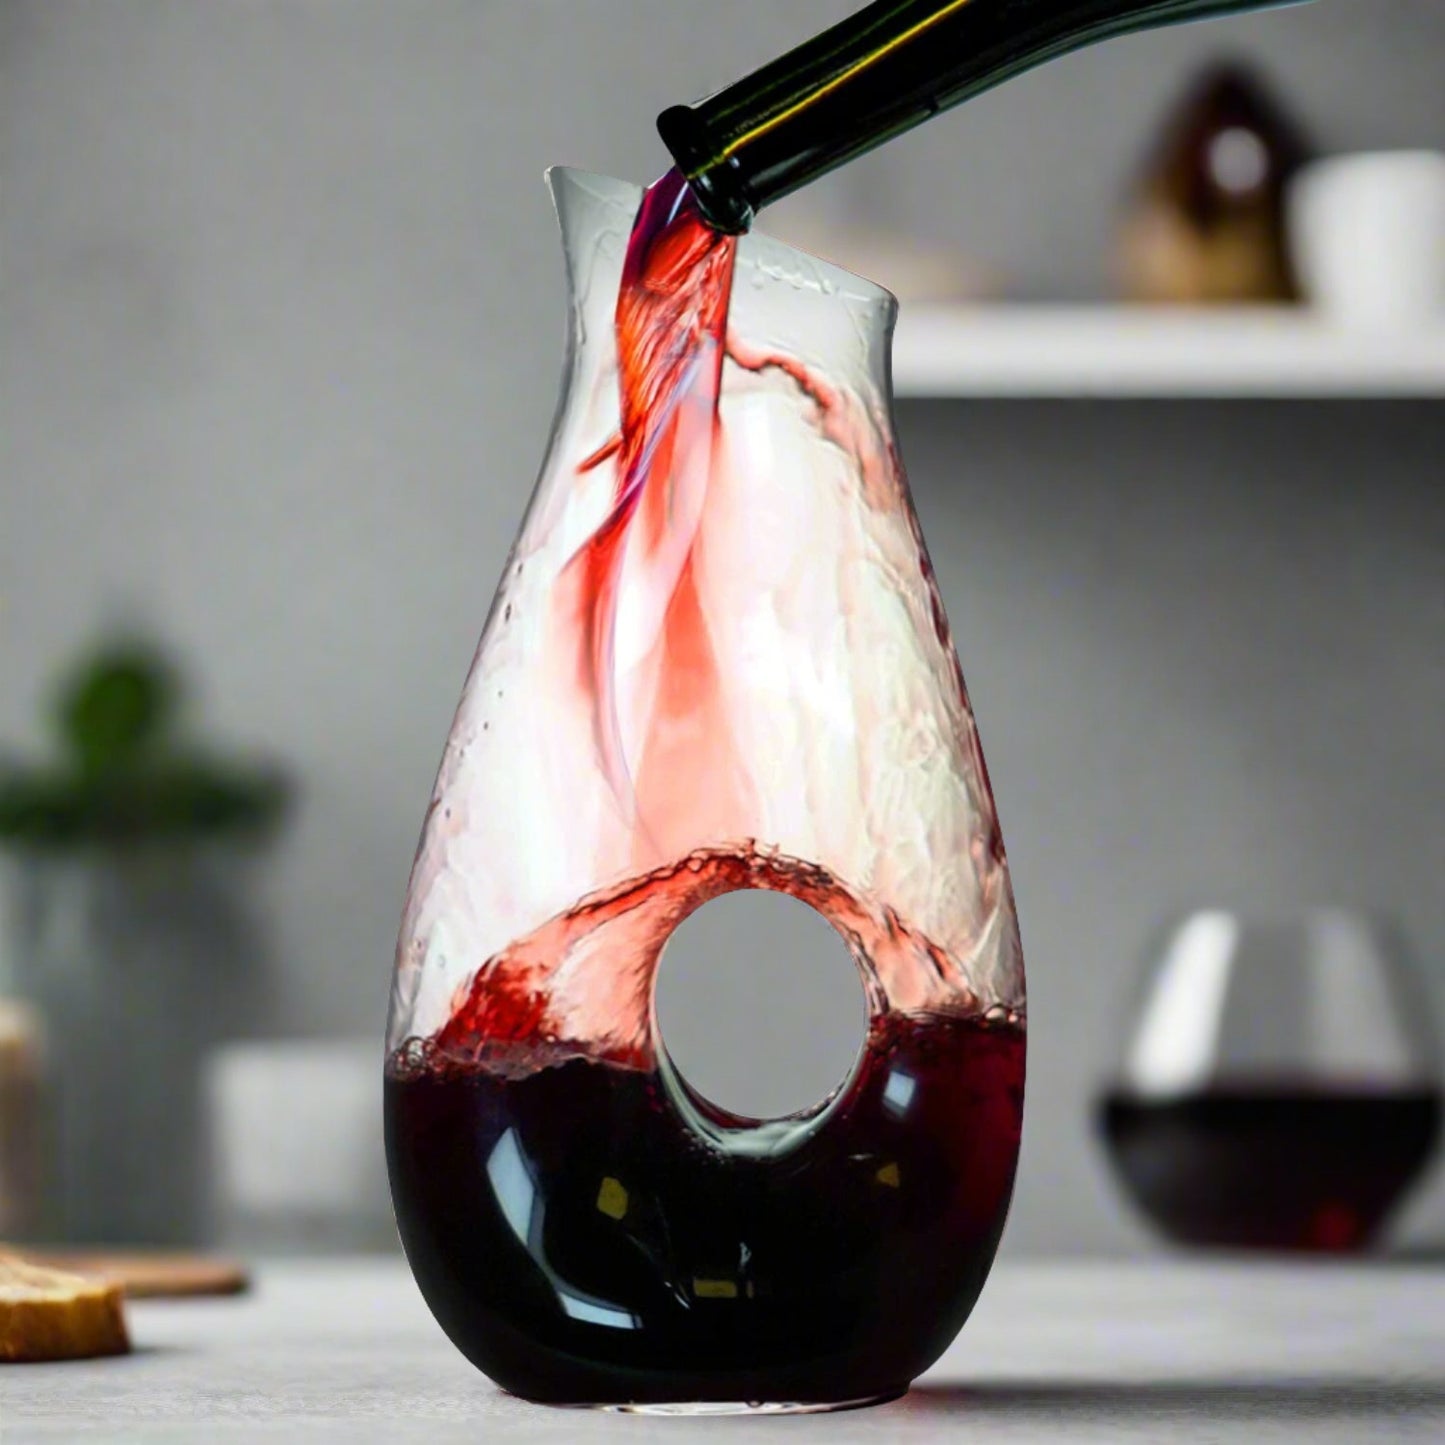 Hollow Circle Wine Decanter - Decant with Elegance, 1500 Ml Lead-Free Crystal Clear Glass Red Wine Decanter Juice Container Wine Decanters and Carafes Good Looking Decanters for Wine Lovers